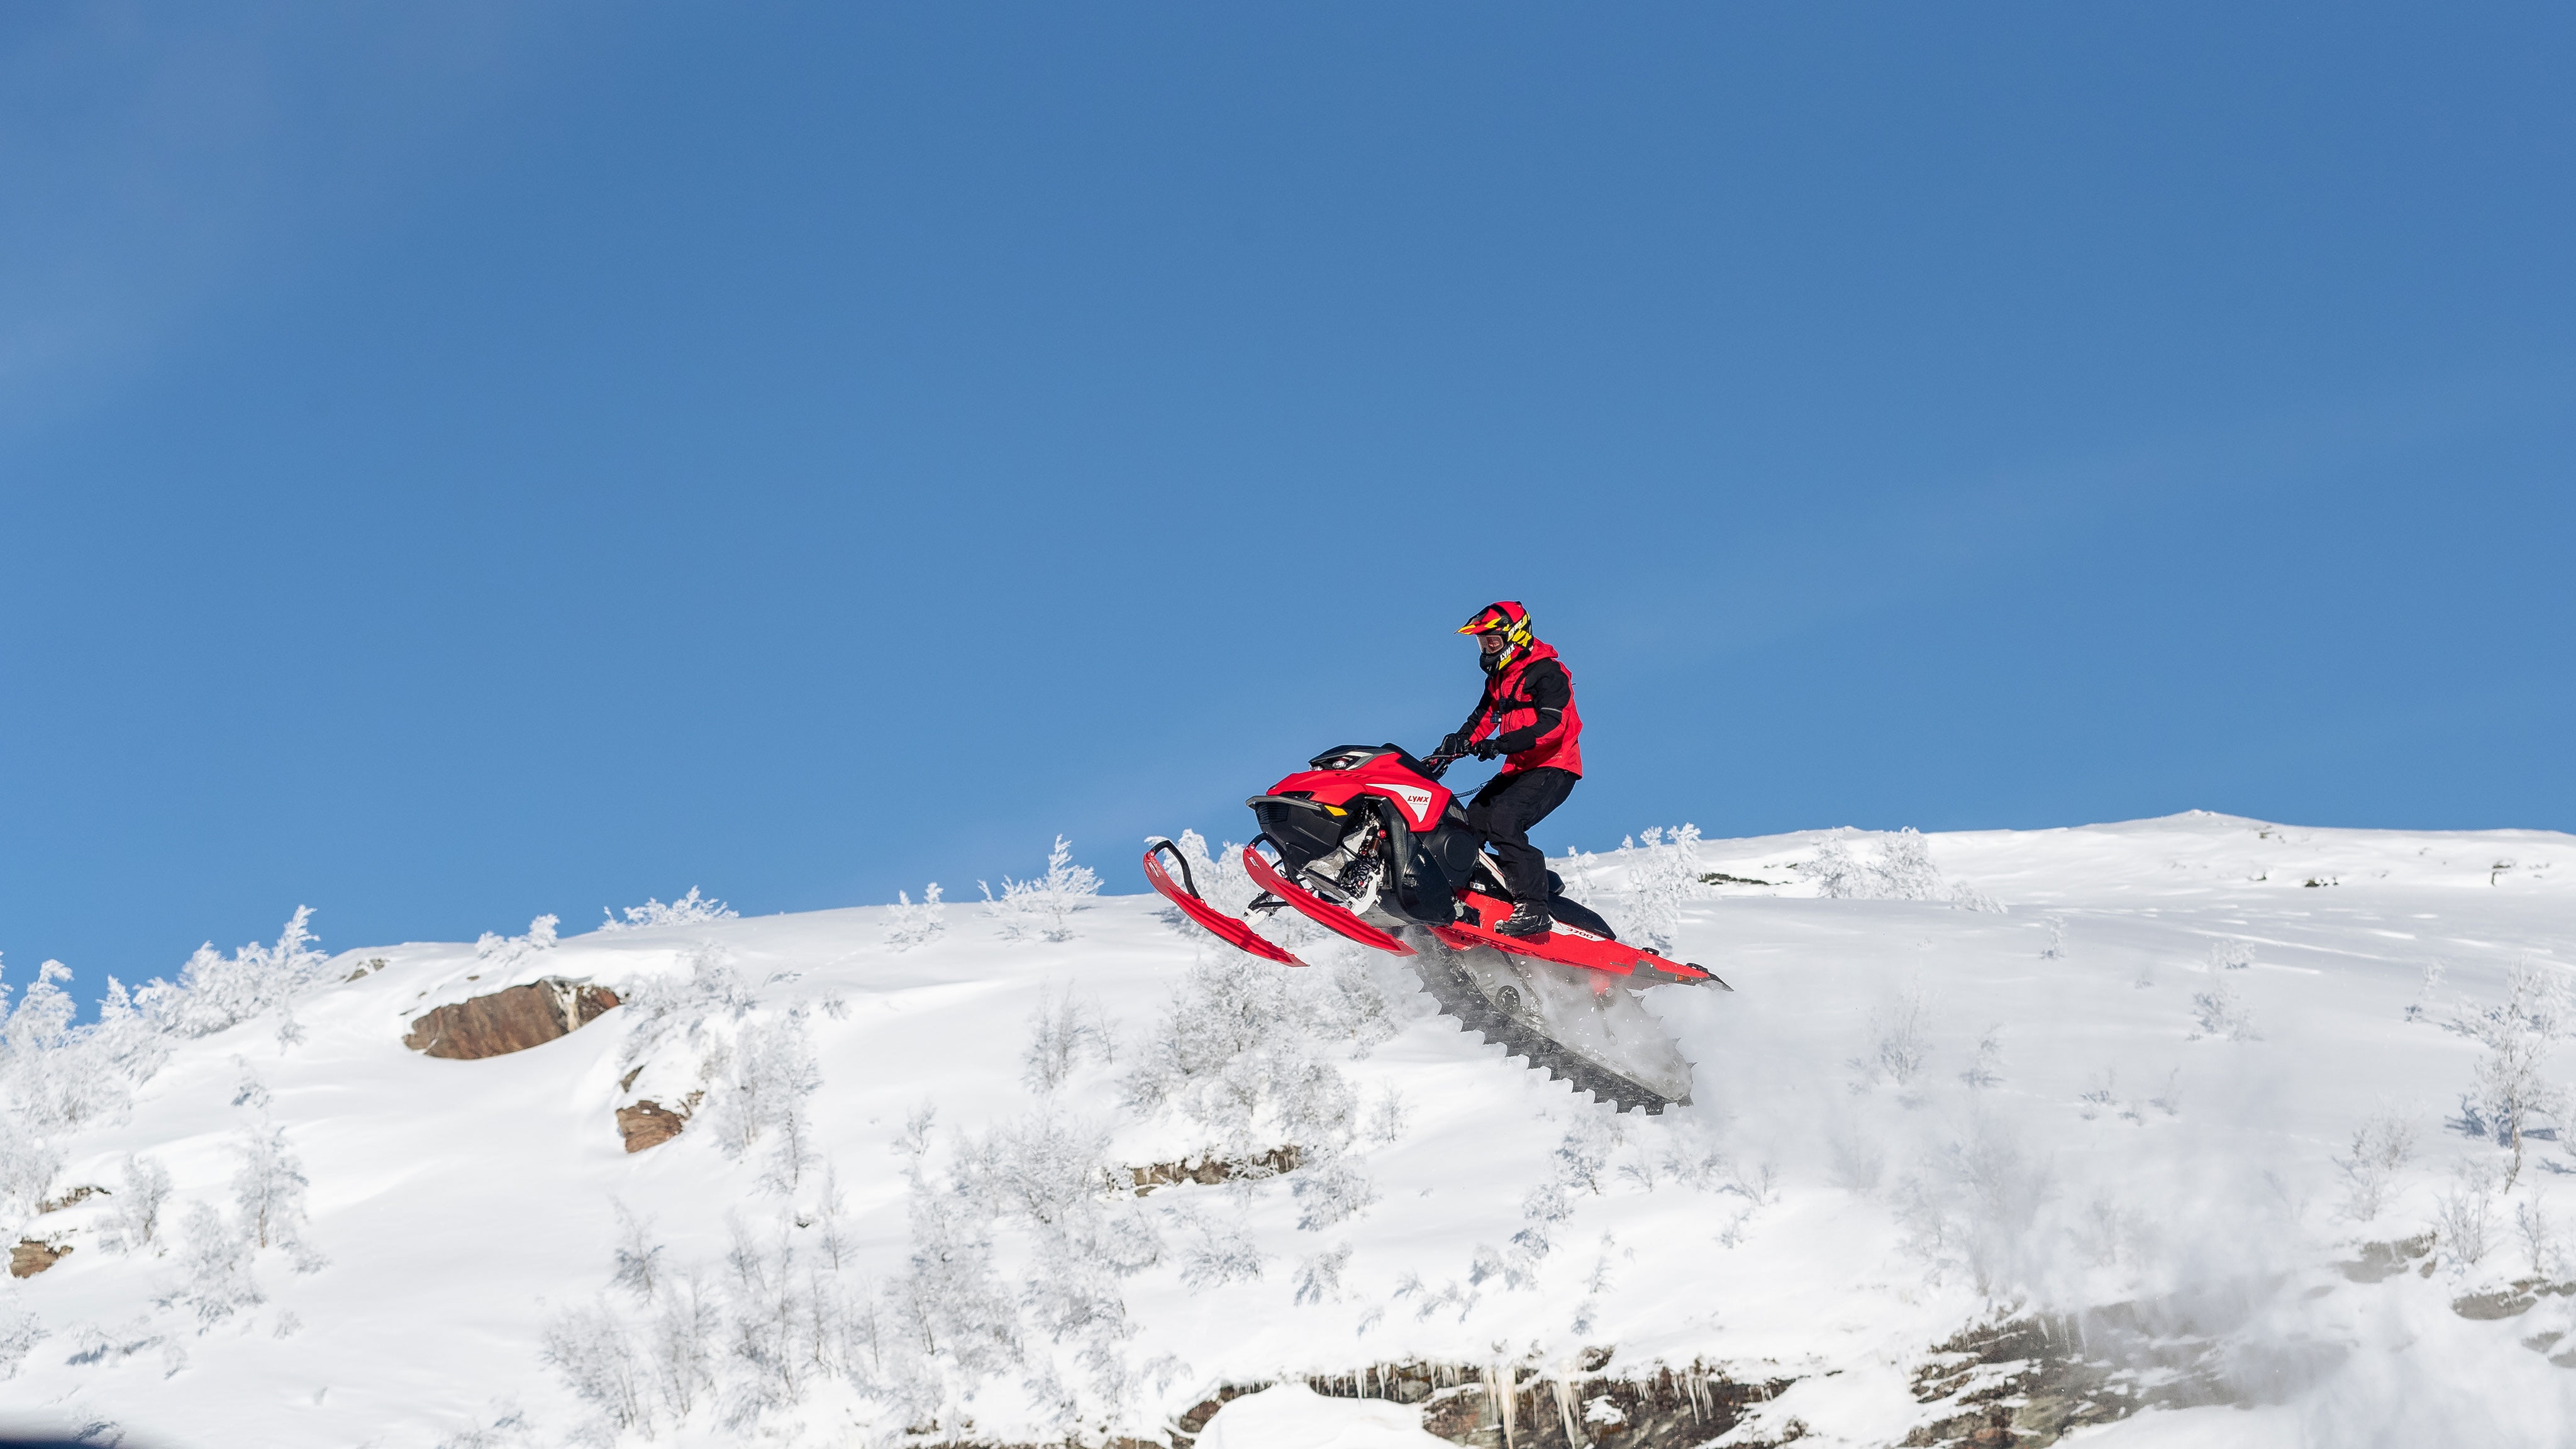 Andreas Bergmark jumping with his Lynx snowmobile